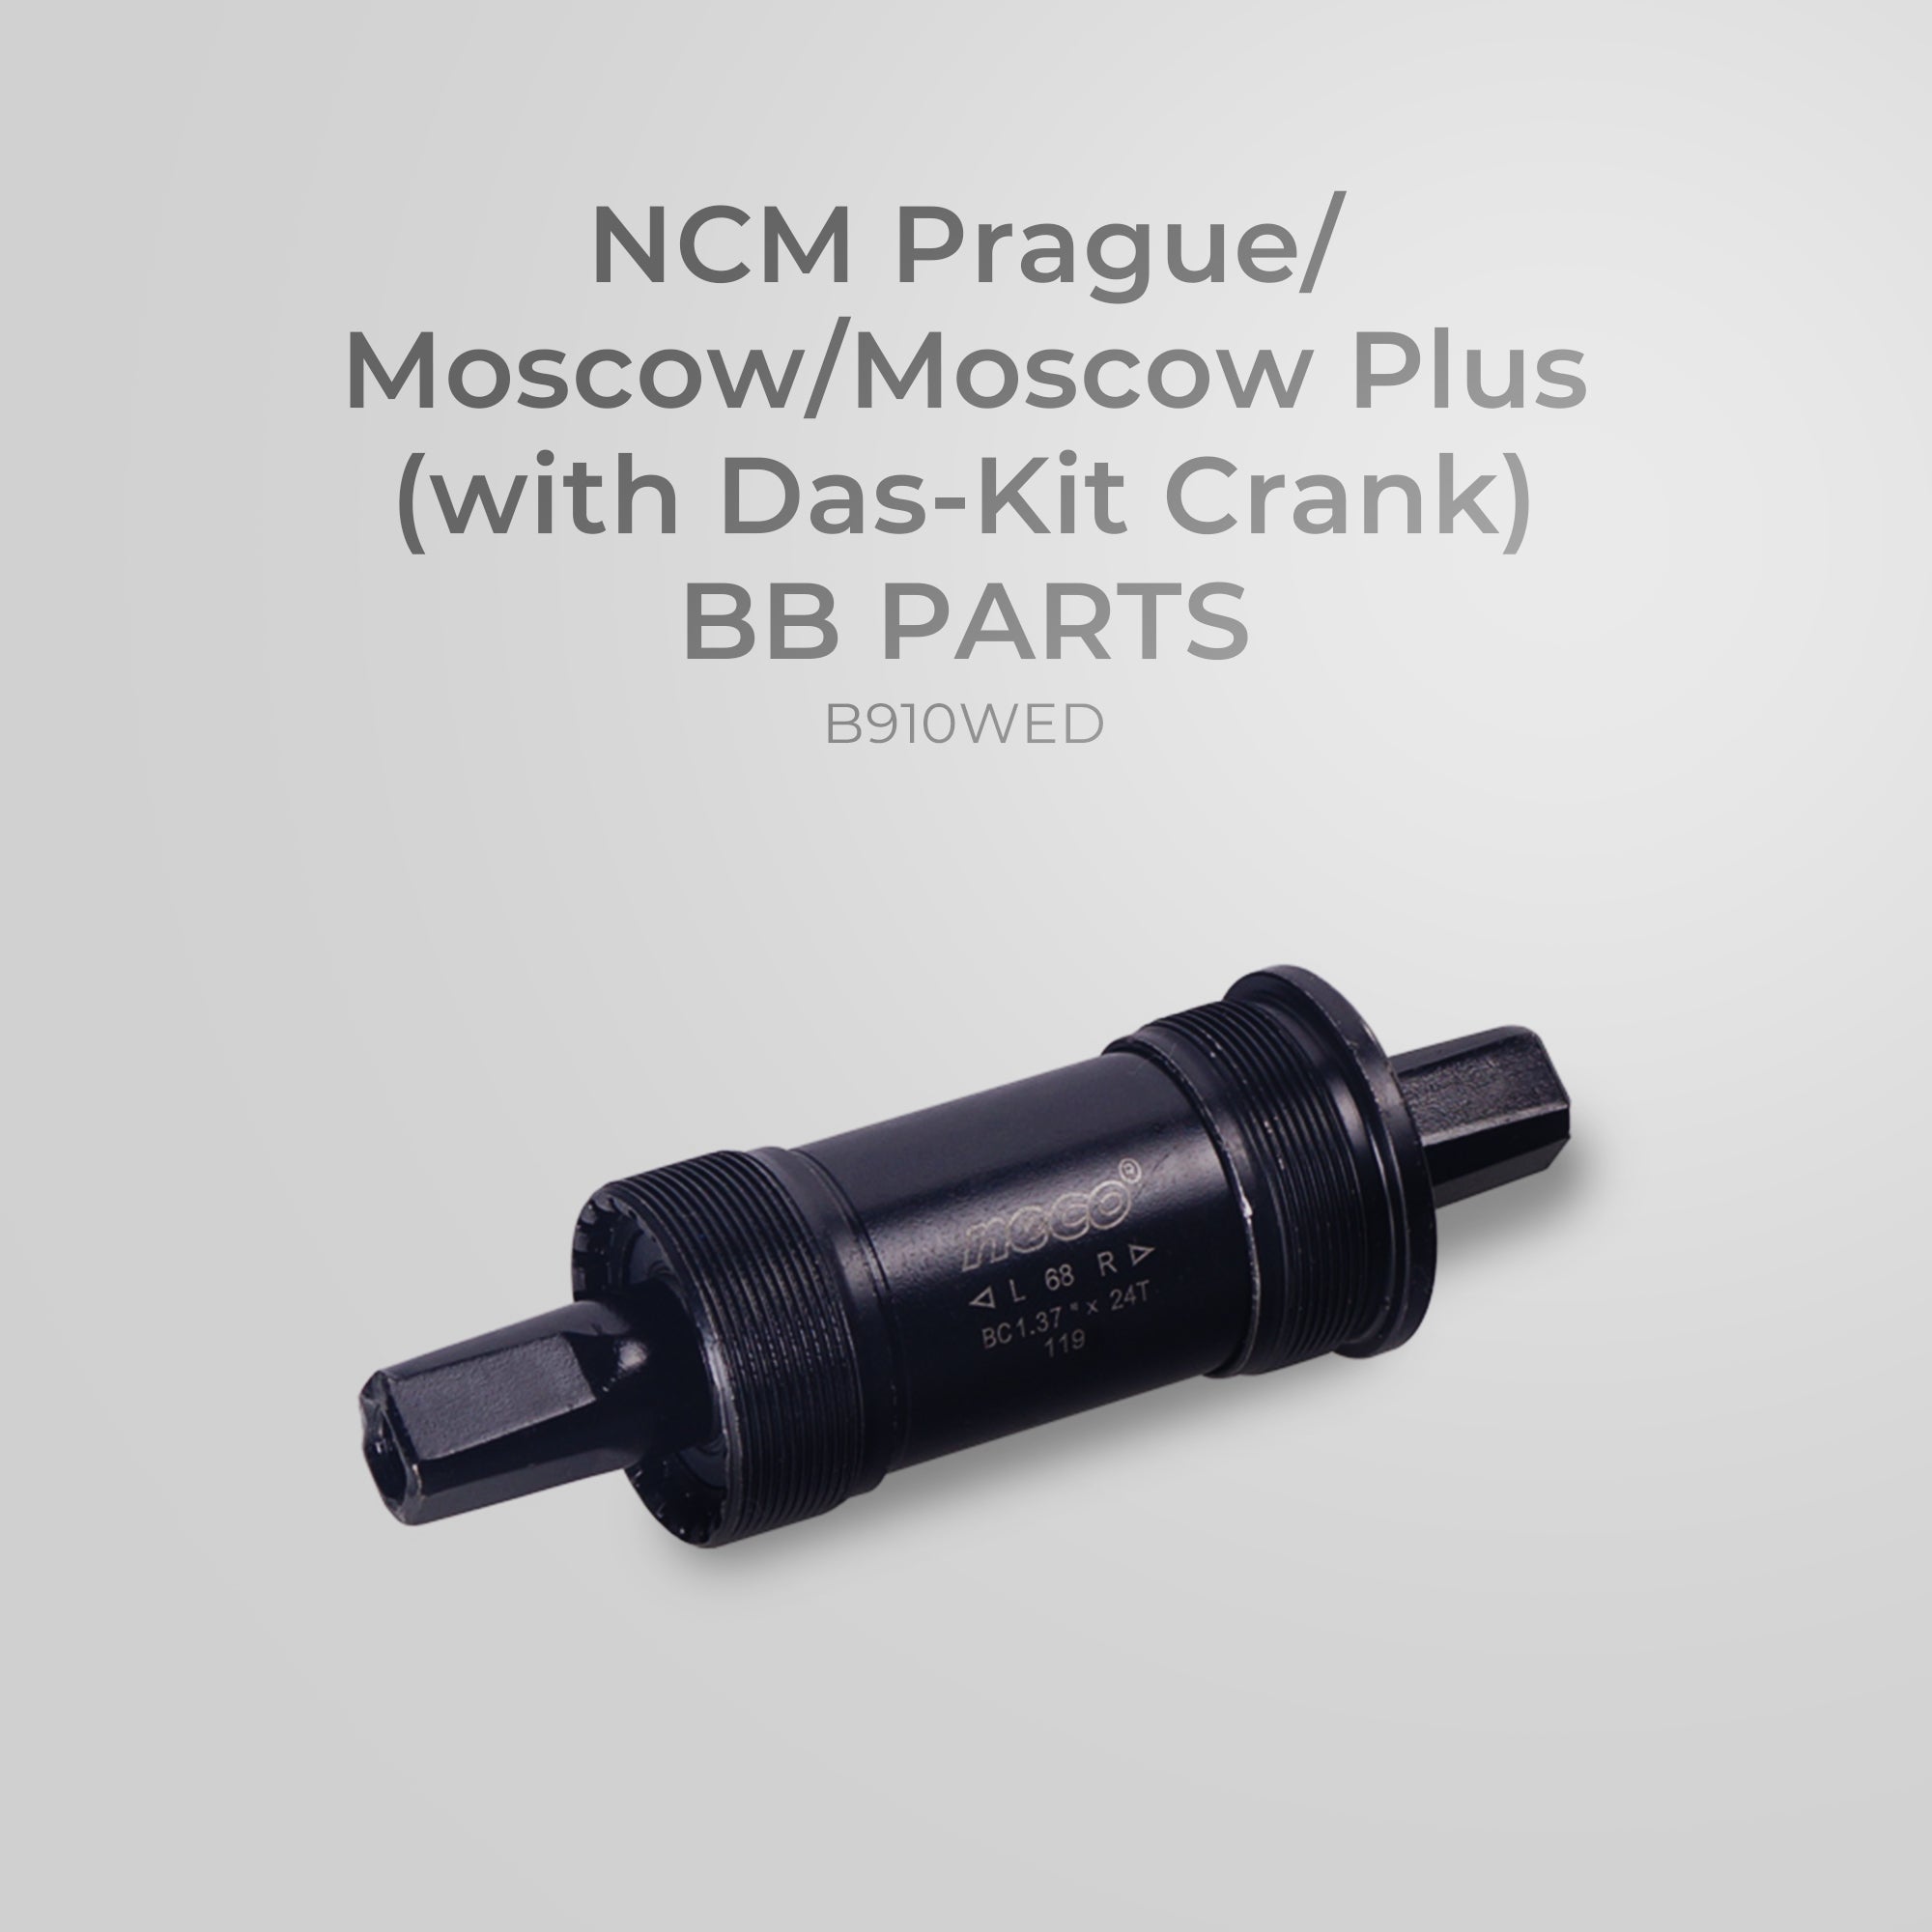 NCM Prague/Moscow/Moscow Plus (with Das-Kit Crank) BB Parts - B910WED